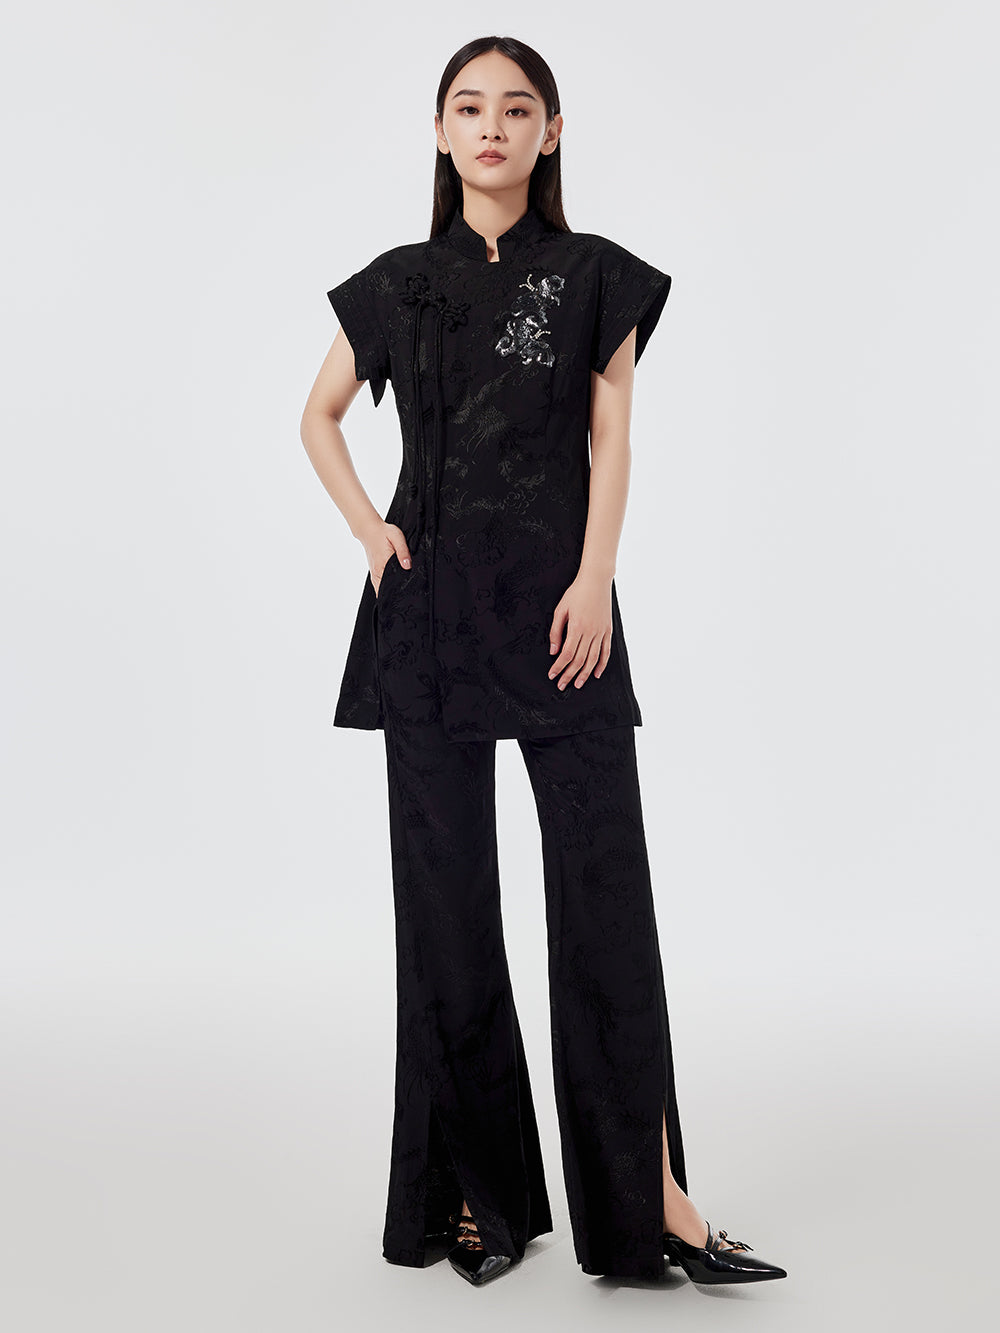 MUKZIN Chinese Embroidery Print Sequin Slim Fit T-shirt